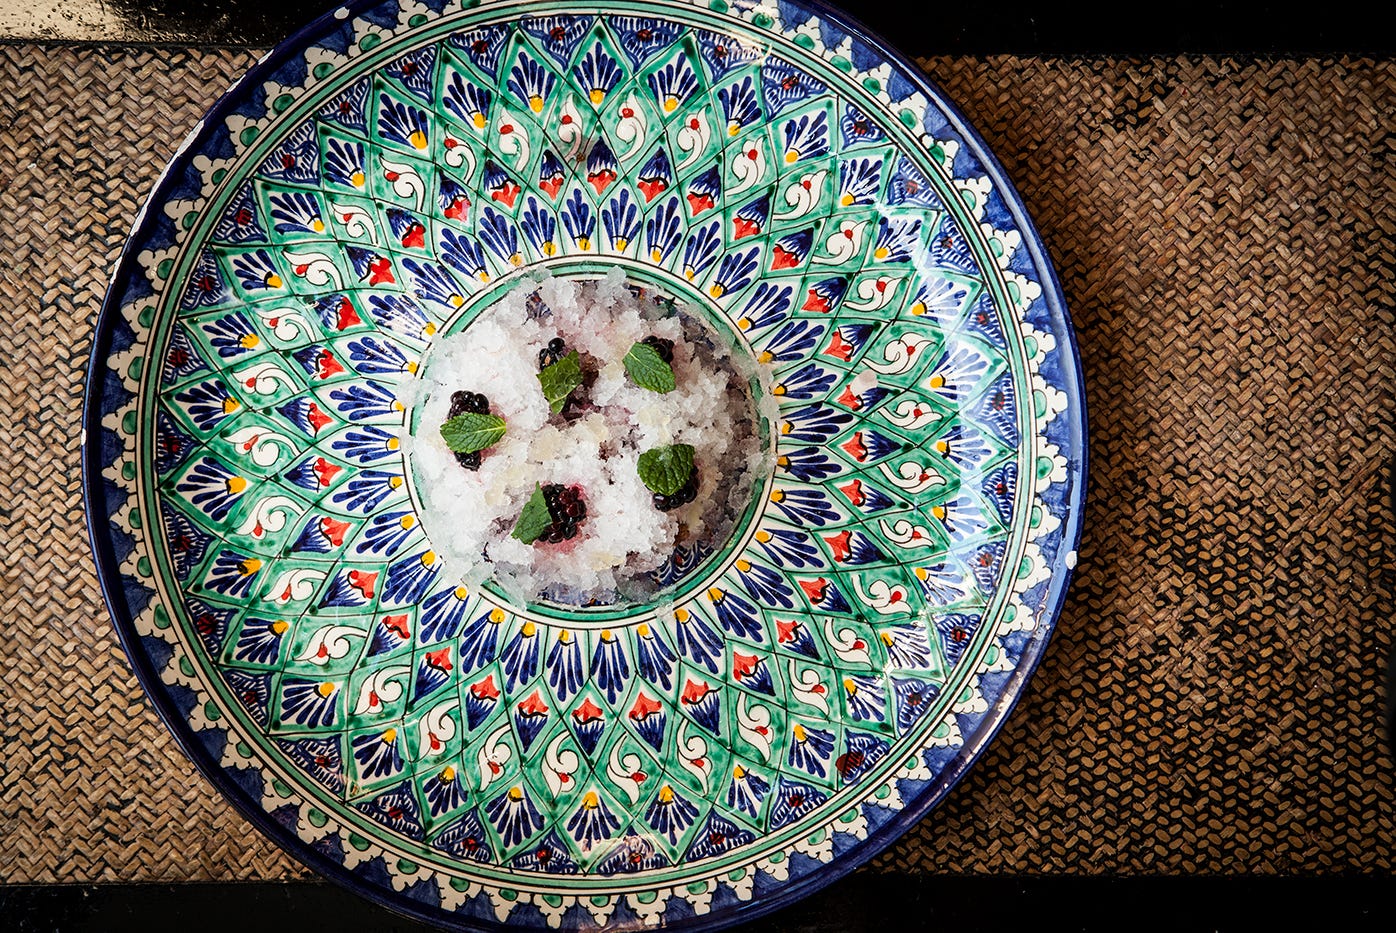 An overhead of photo of a large colourful plate on a rattan mat. In the centre of the plate is a pile of granita, decorated with black mulberries, mint leaves and pieces of mochi.